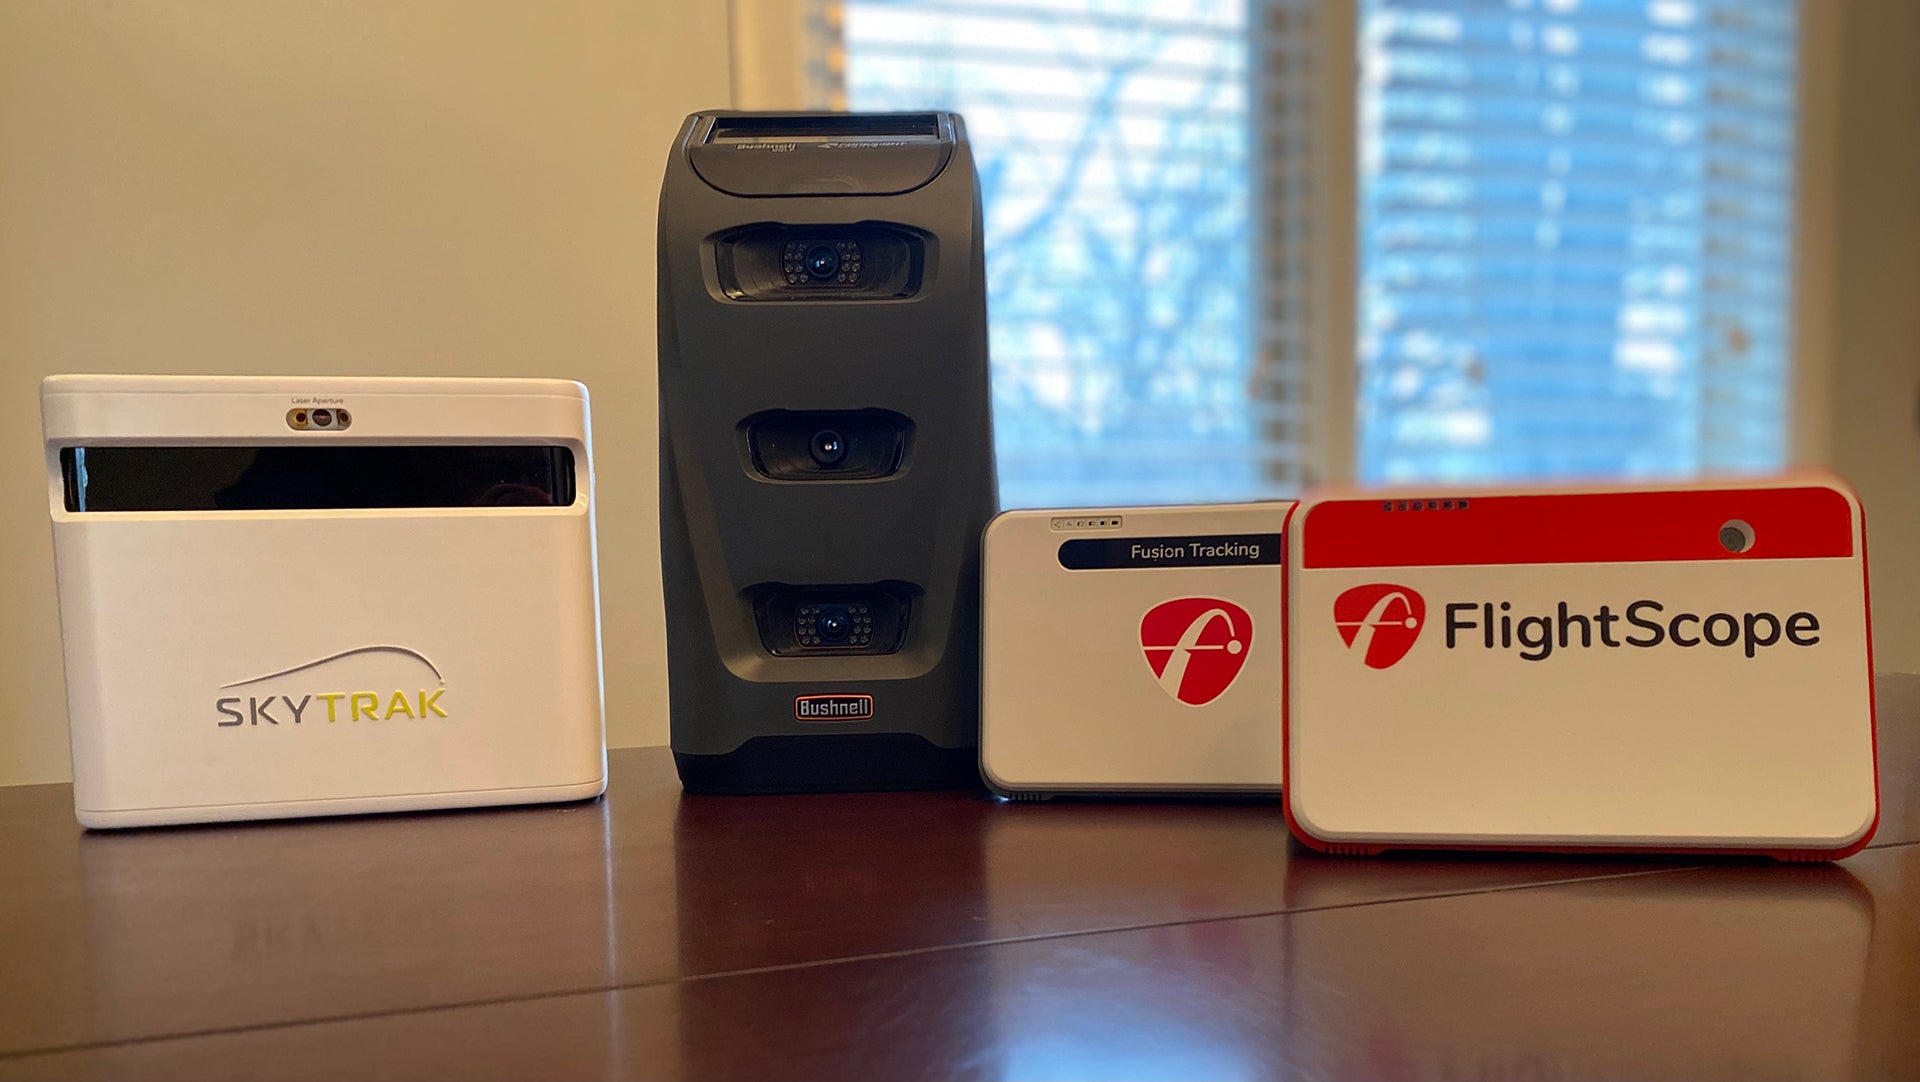 The SkyTrak+, Bushnell Launch Pro, FlightScope Mevo+ Limited Edition, and Mevo+ launch monitors standing together on a table with a window in the background